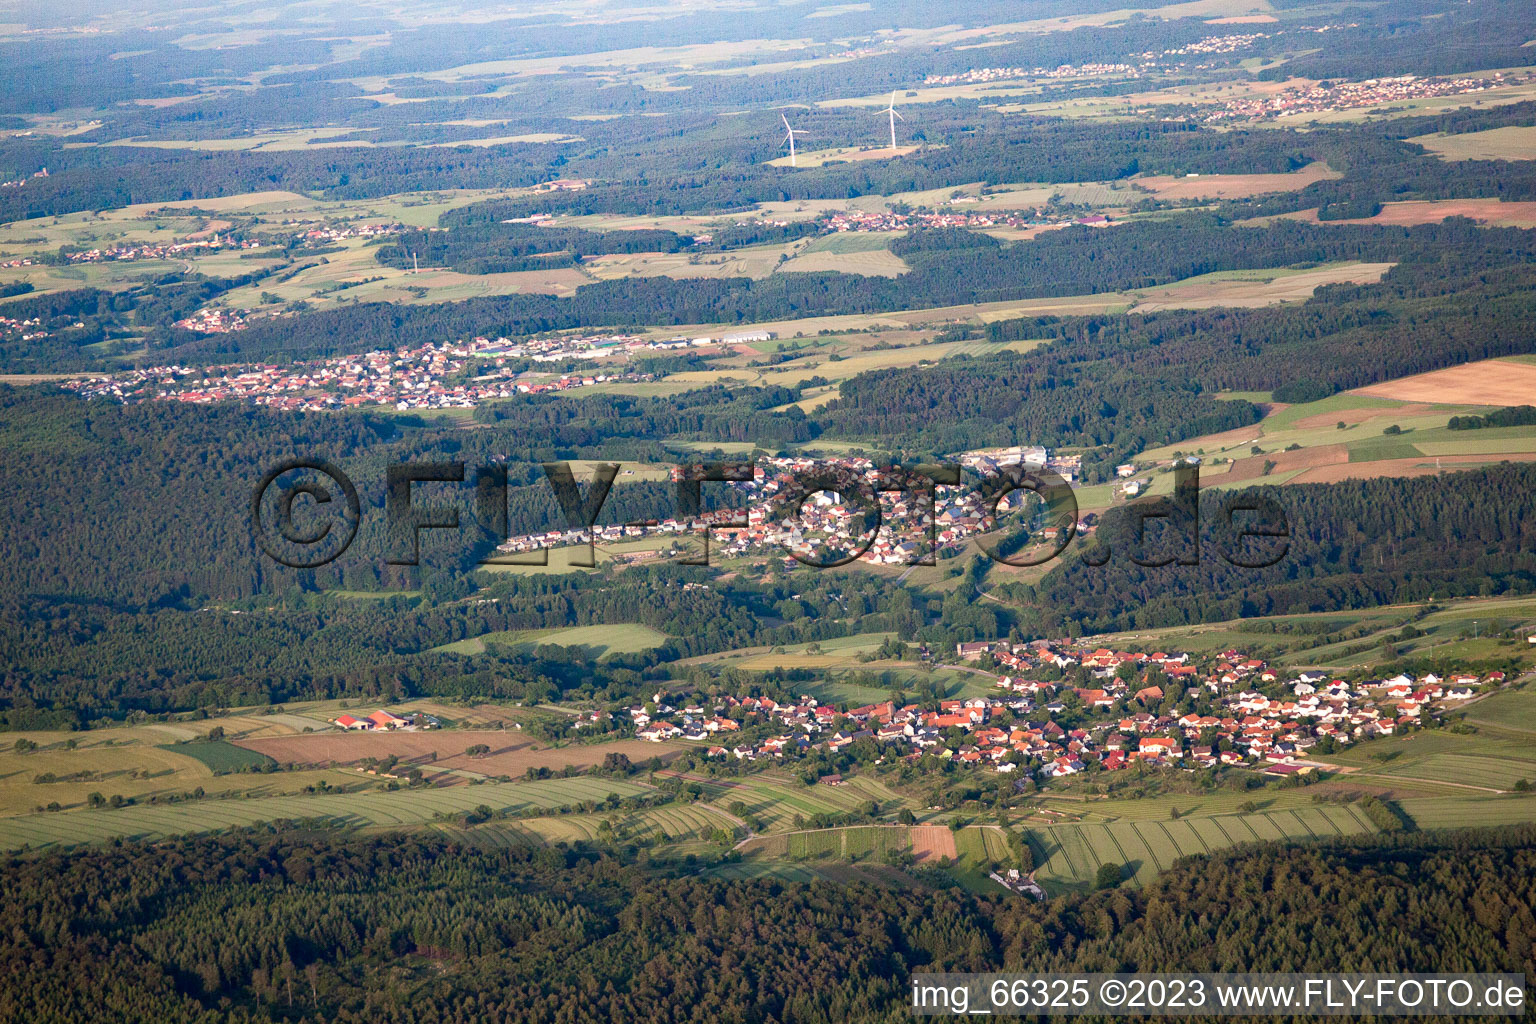 Aerial photograpy of Village - view on the edge of agricultural fields and farmland in the district Robern in Fahrenbach in the state Baden-Wurttemberg, Germany